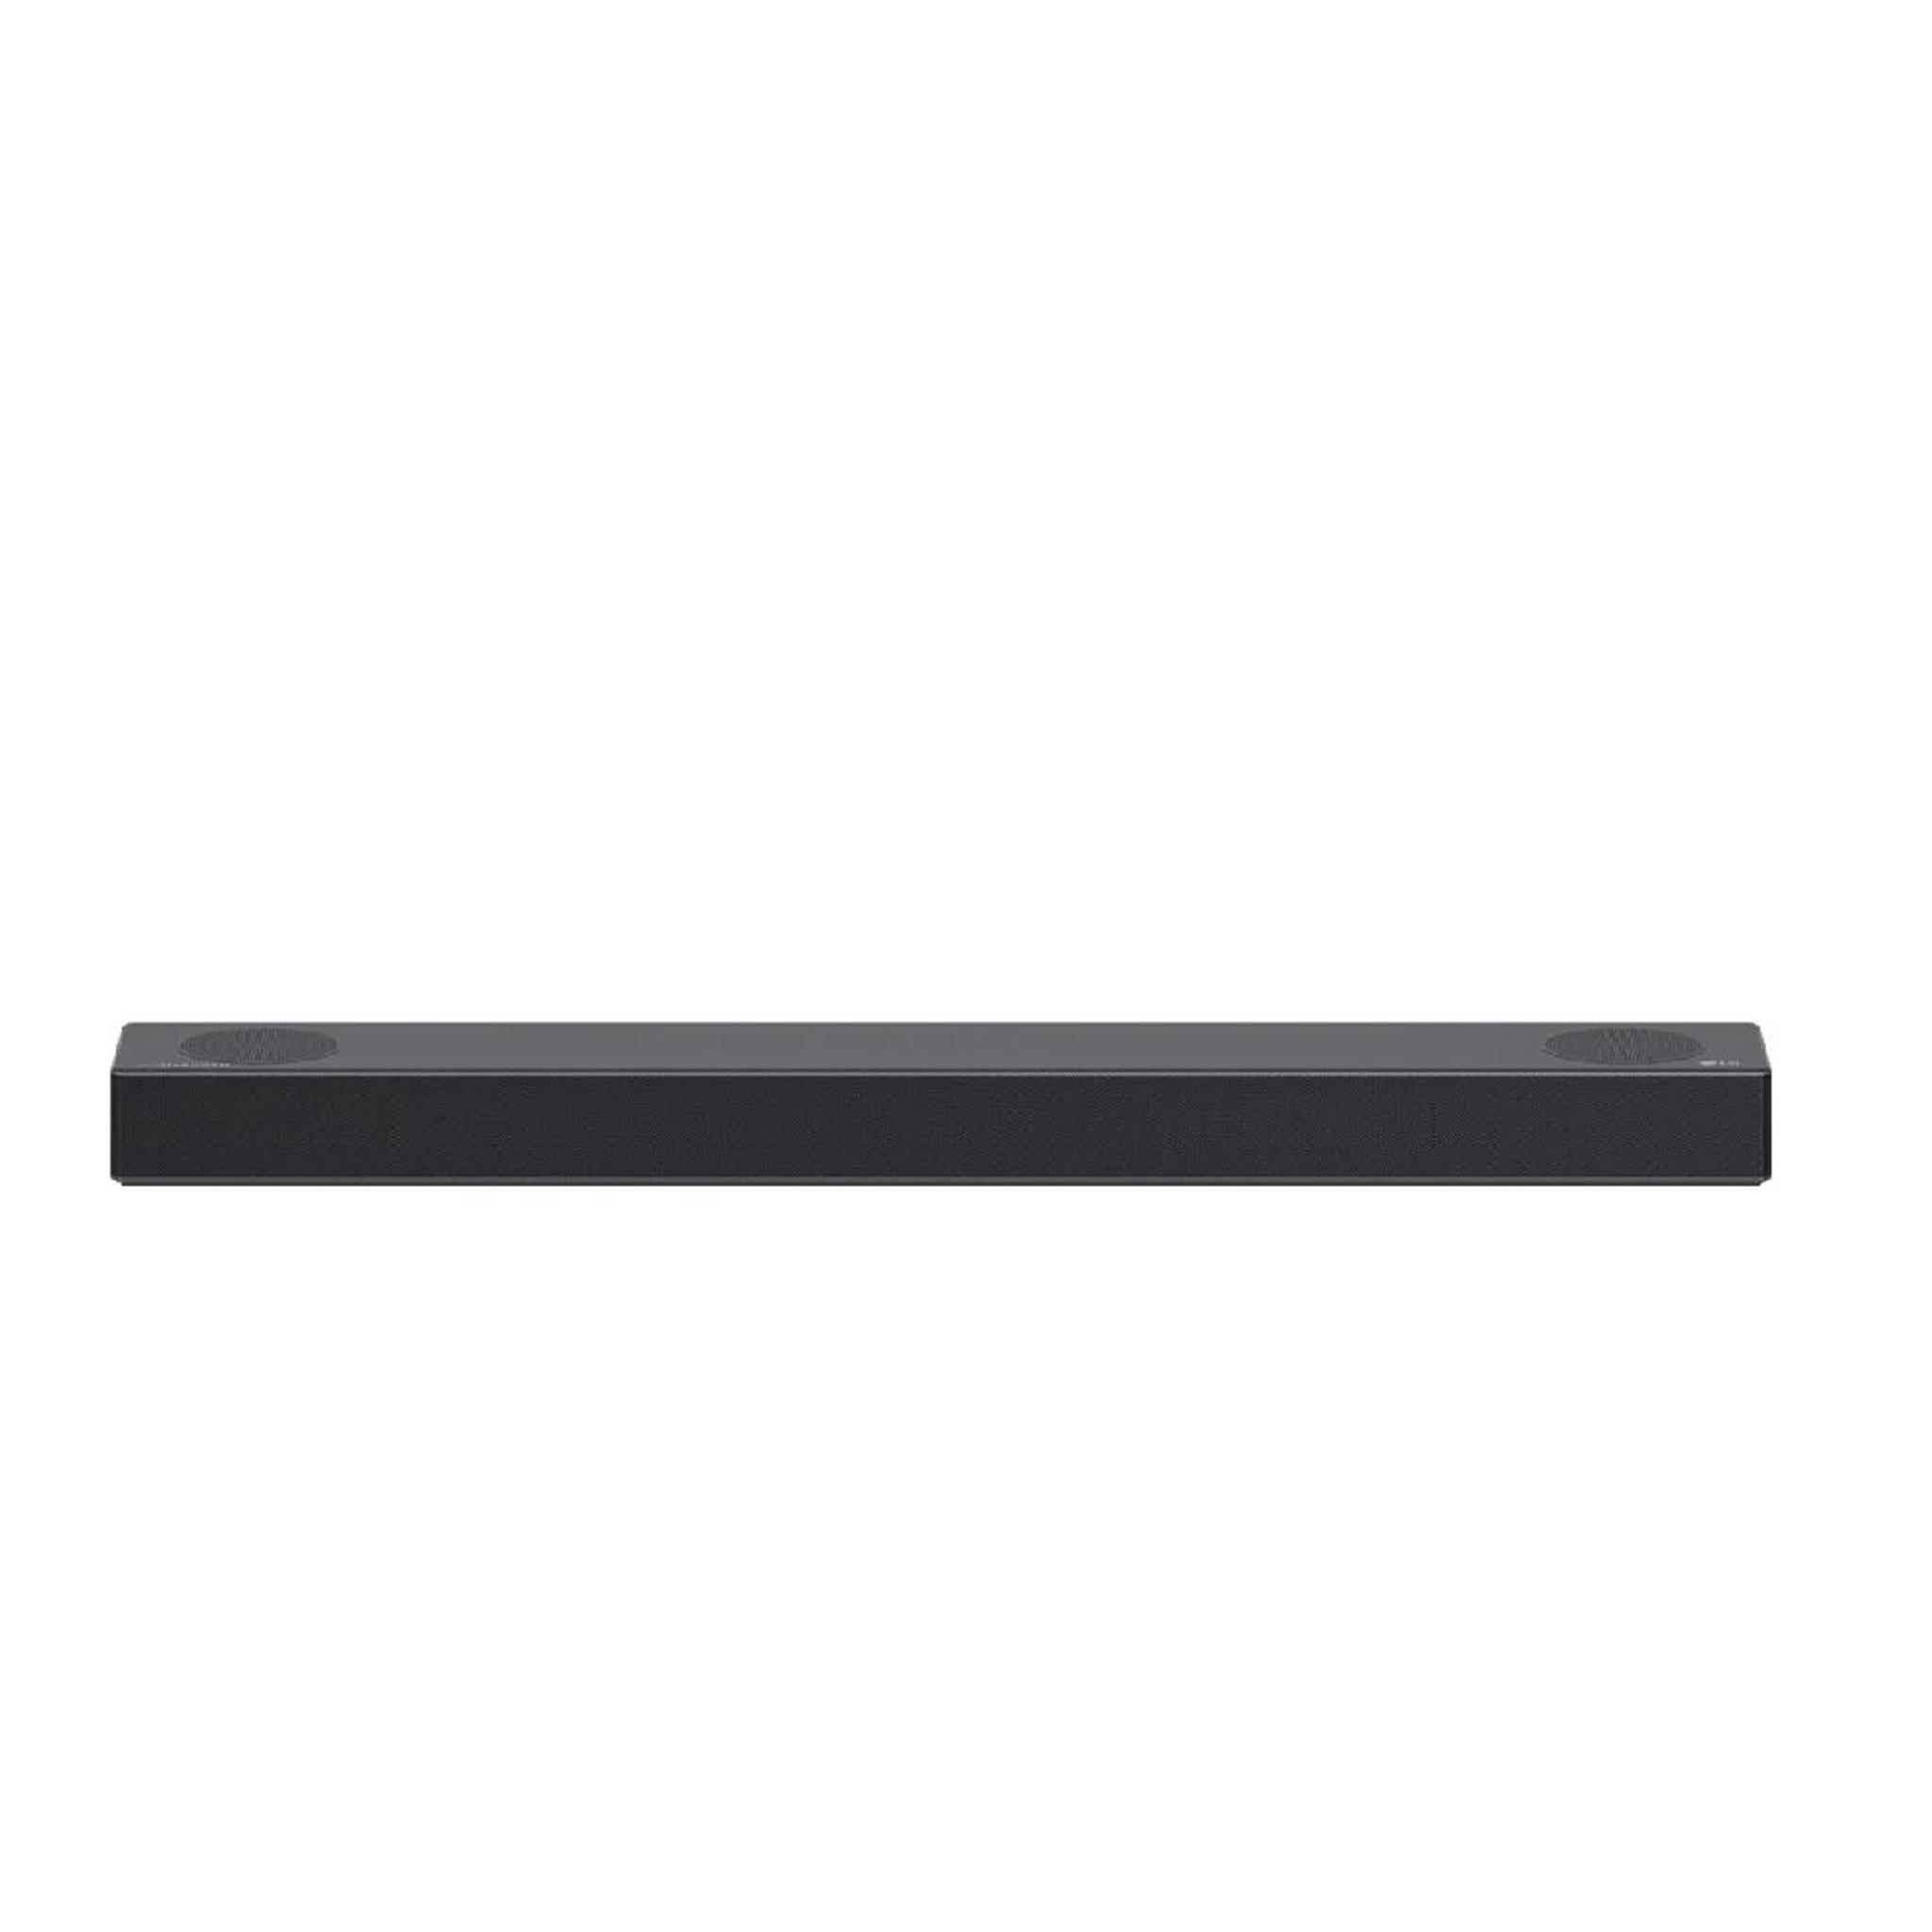 LG Wireless Sound Bar and Subwoofer, 3.1.2 Channel, 380 Watts, S75Q – Black